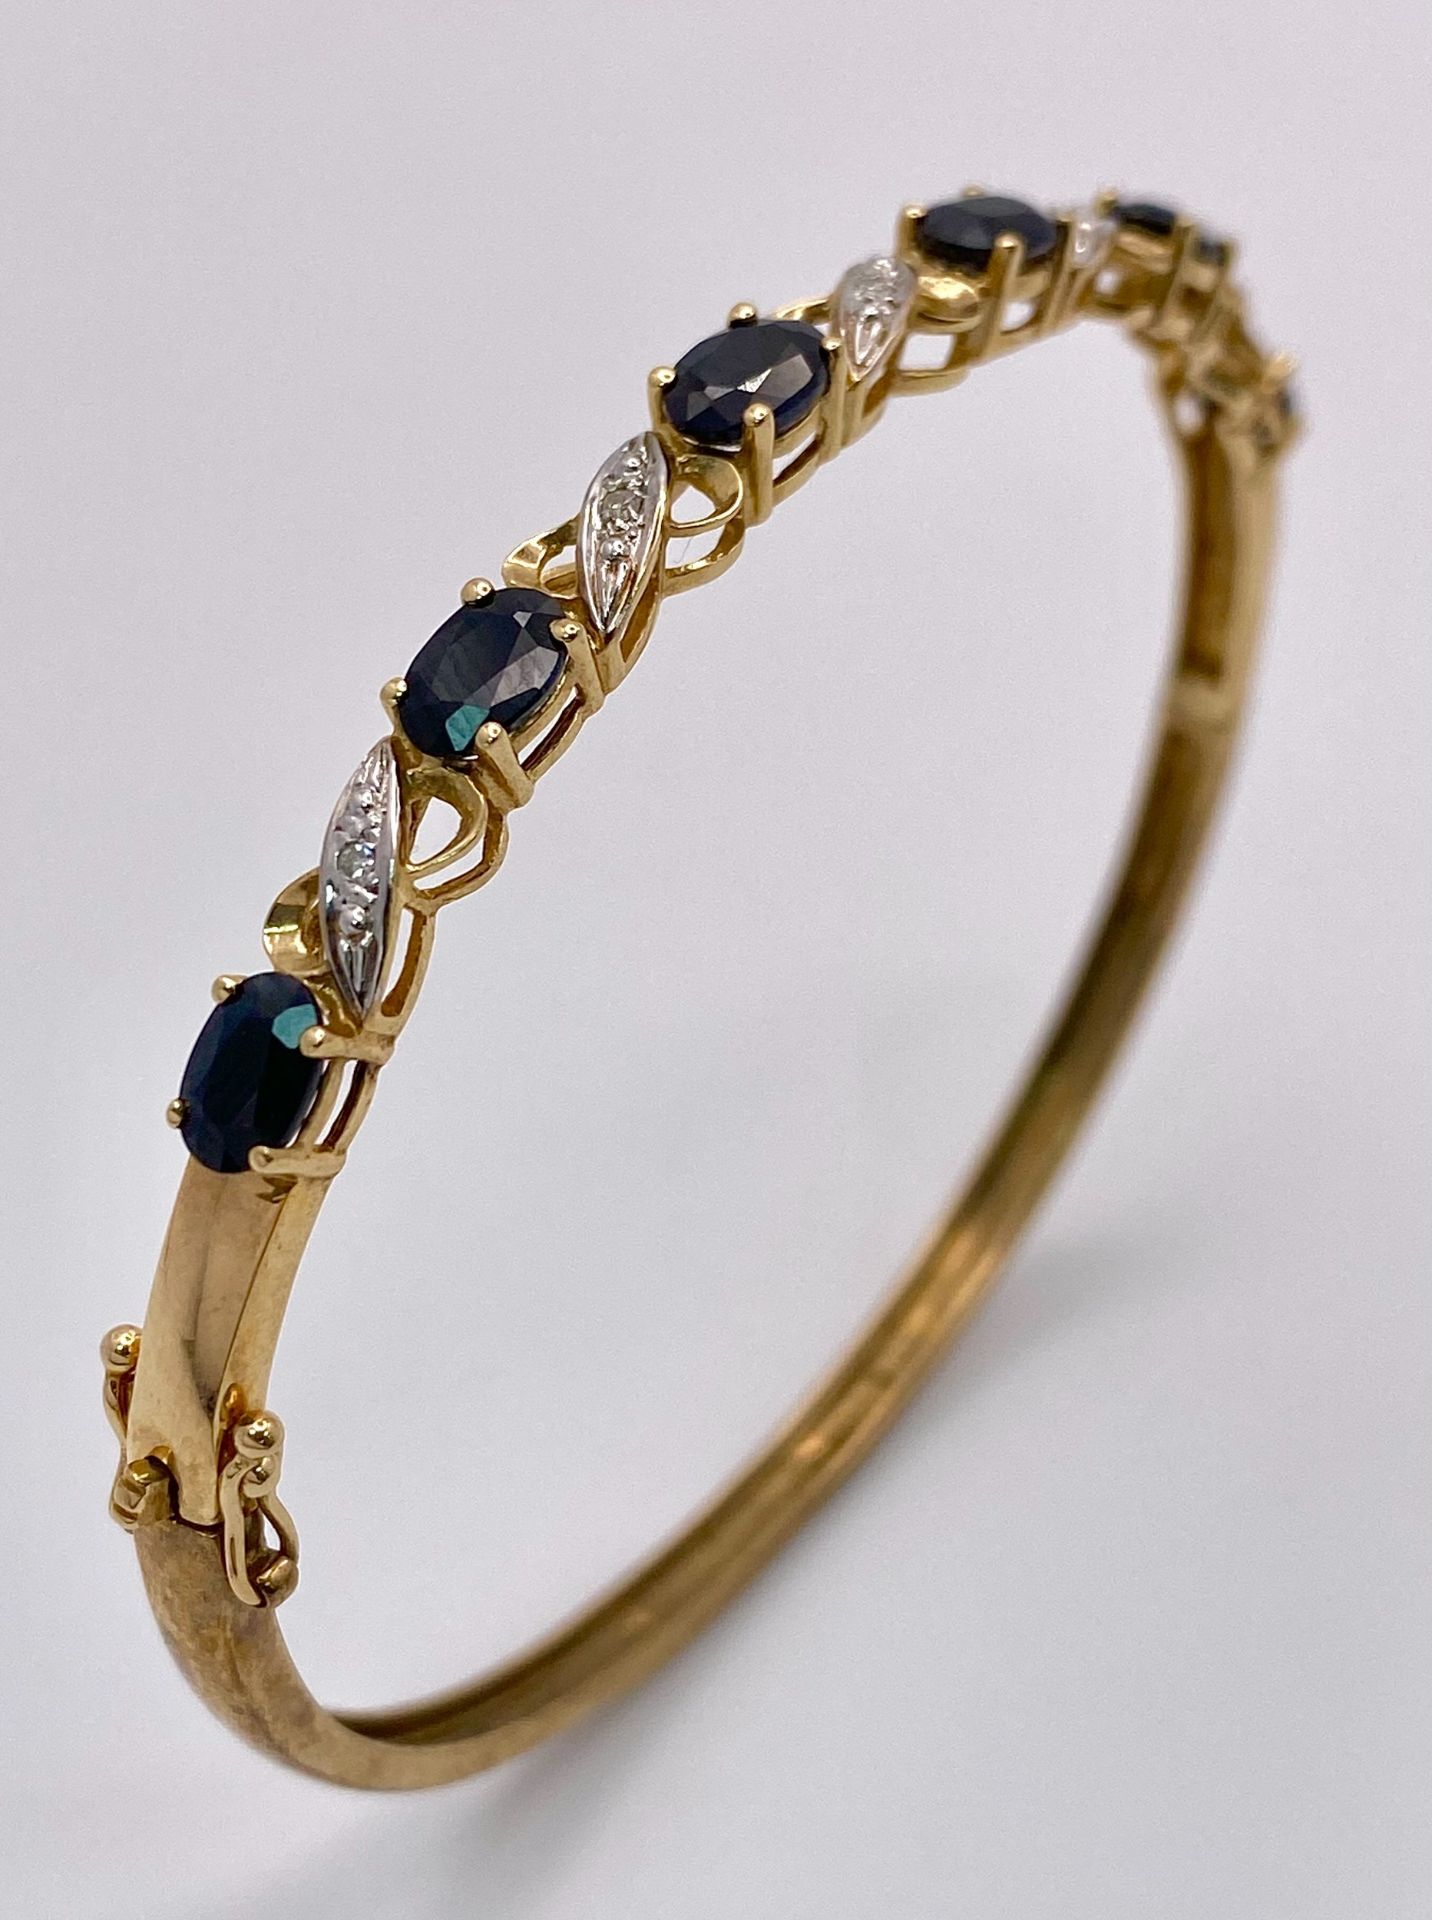 A Vintage 9K Yellow Gold Sapphire and Diamond Bangle. Six oval cut sapphires with diagonal